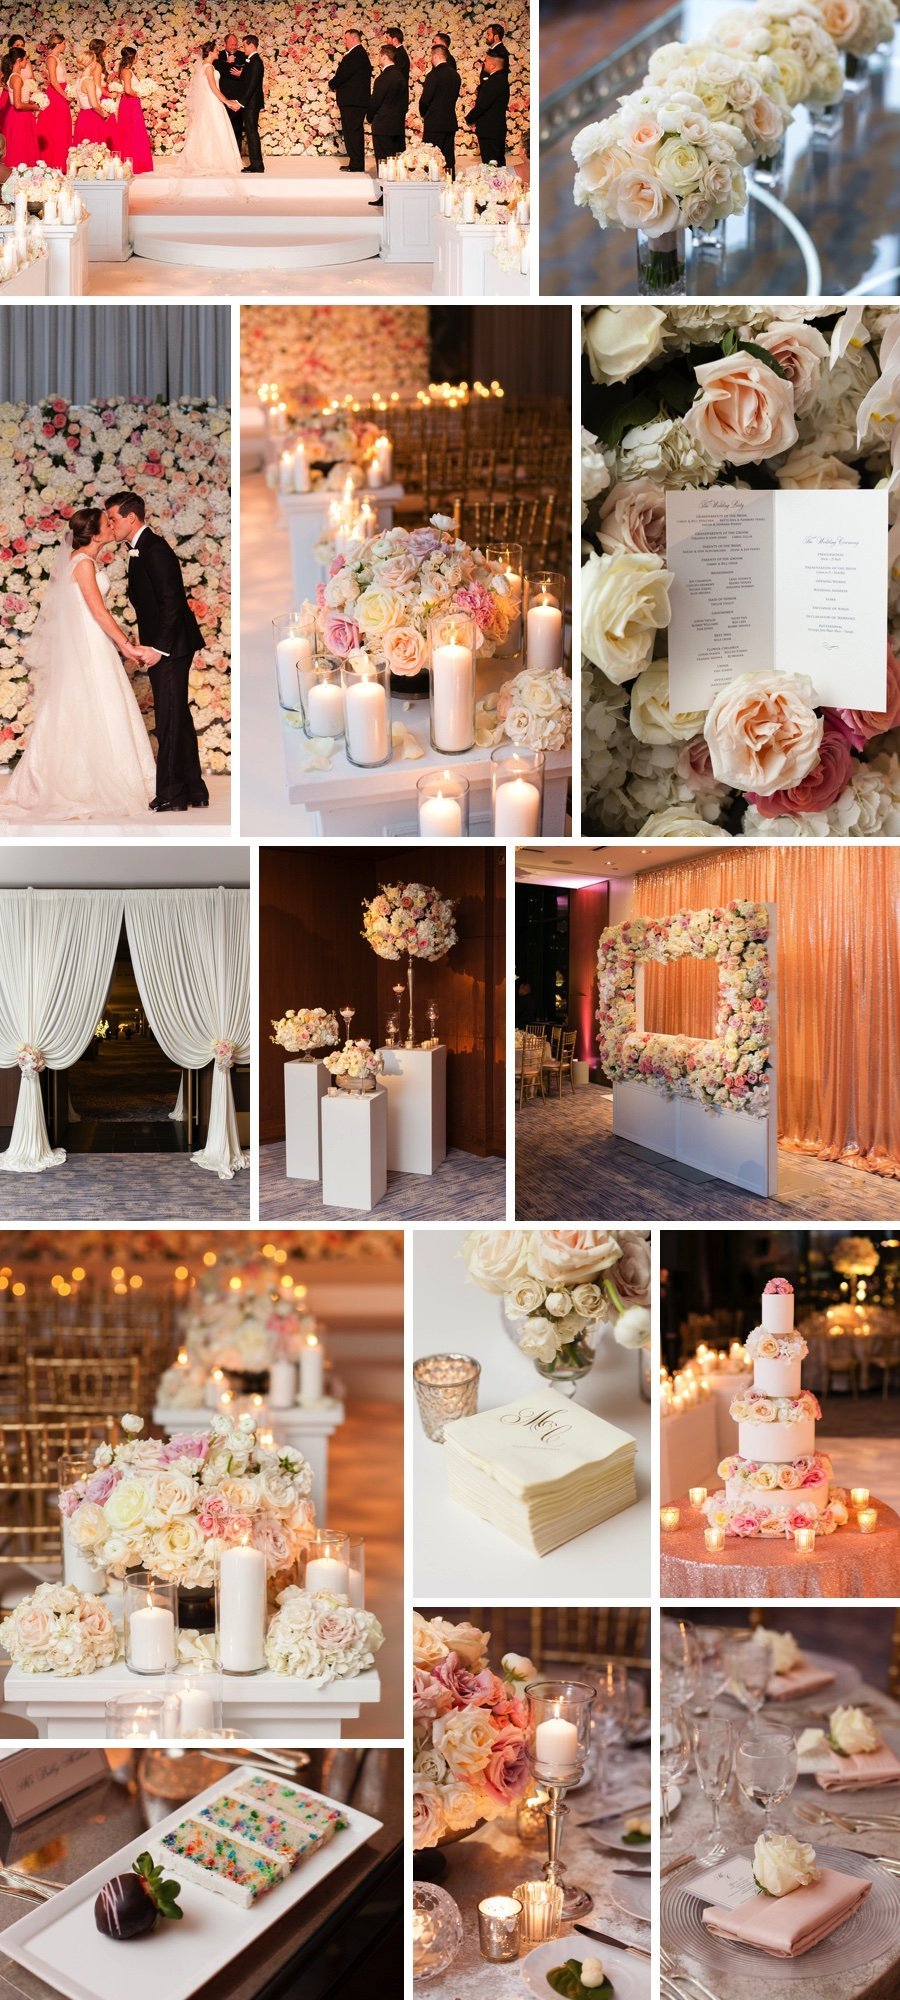 Real wedding: Pink & floral in Chicago